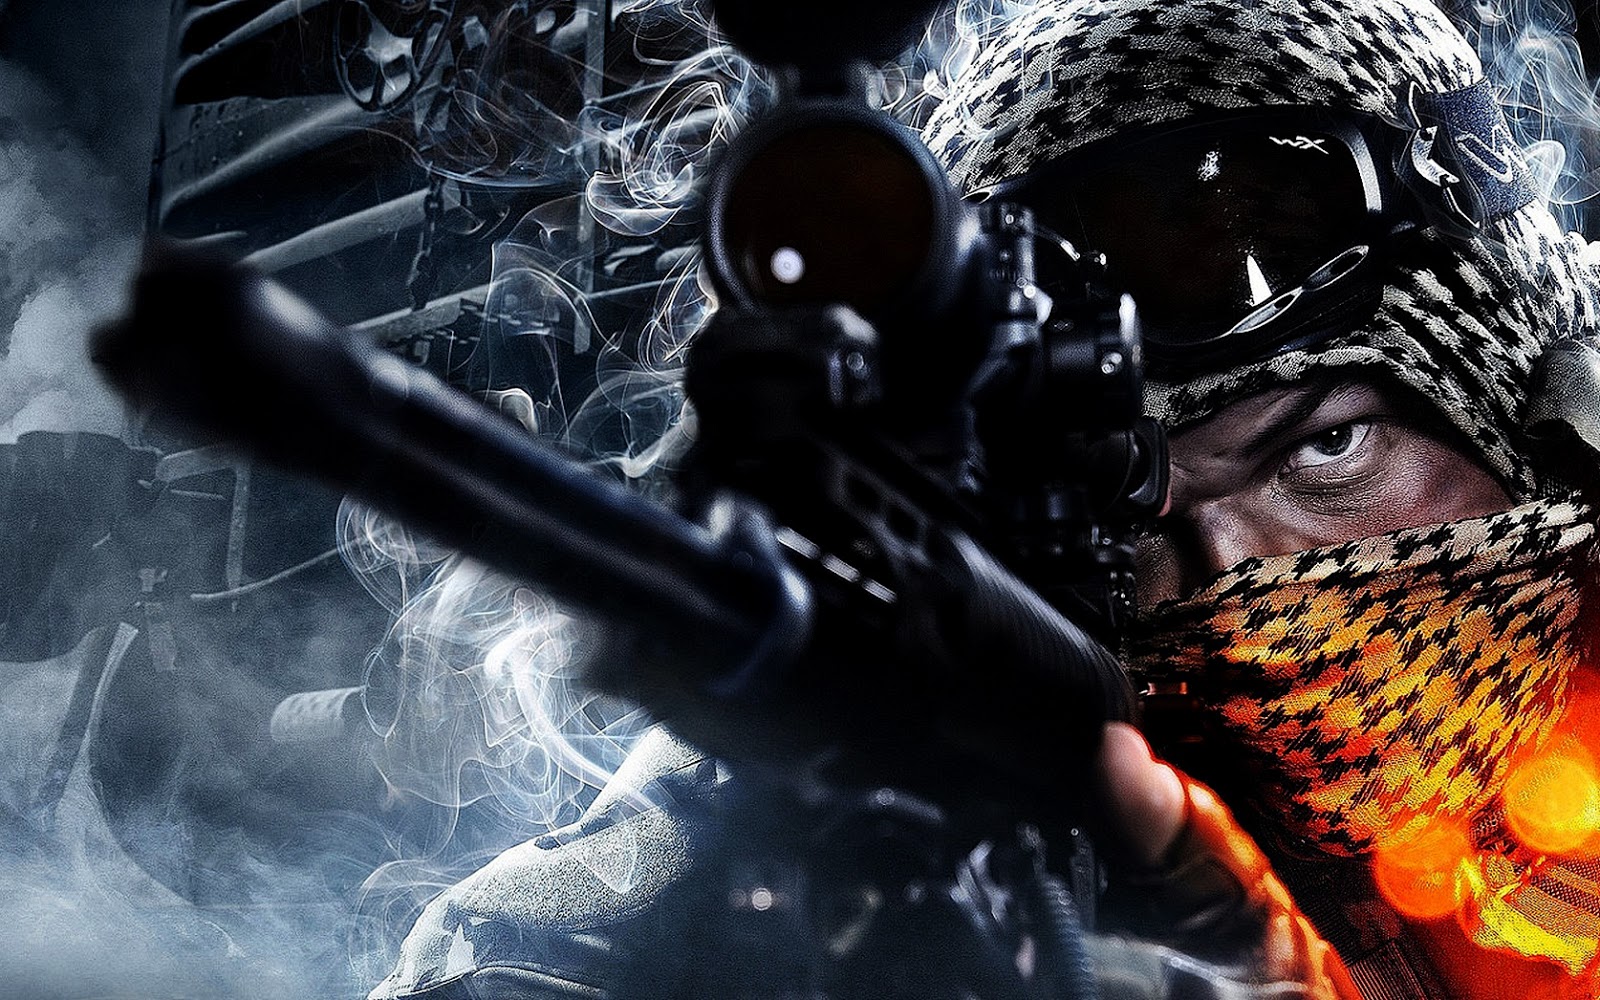 Best Sniper Wallpapers from Video Games Download Free Wallpapers in HD